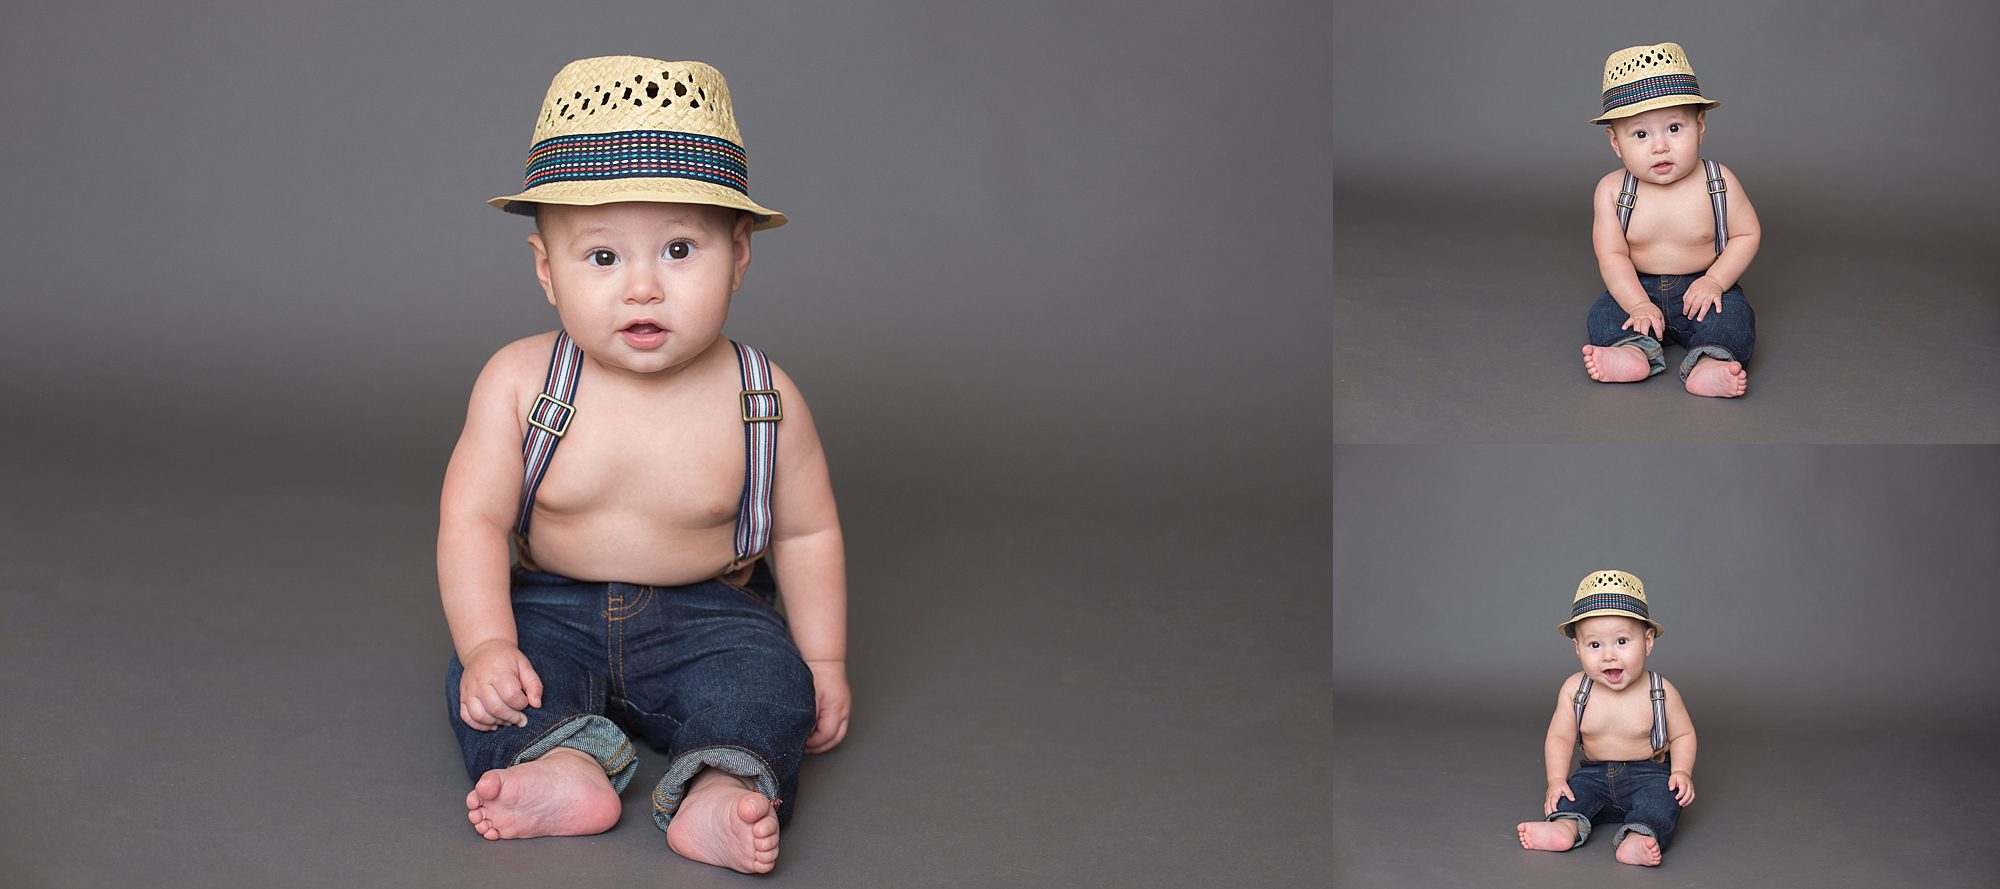 Dallas Children's Photographer | 6 month old photography session